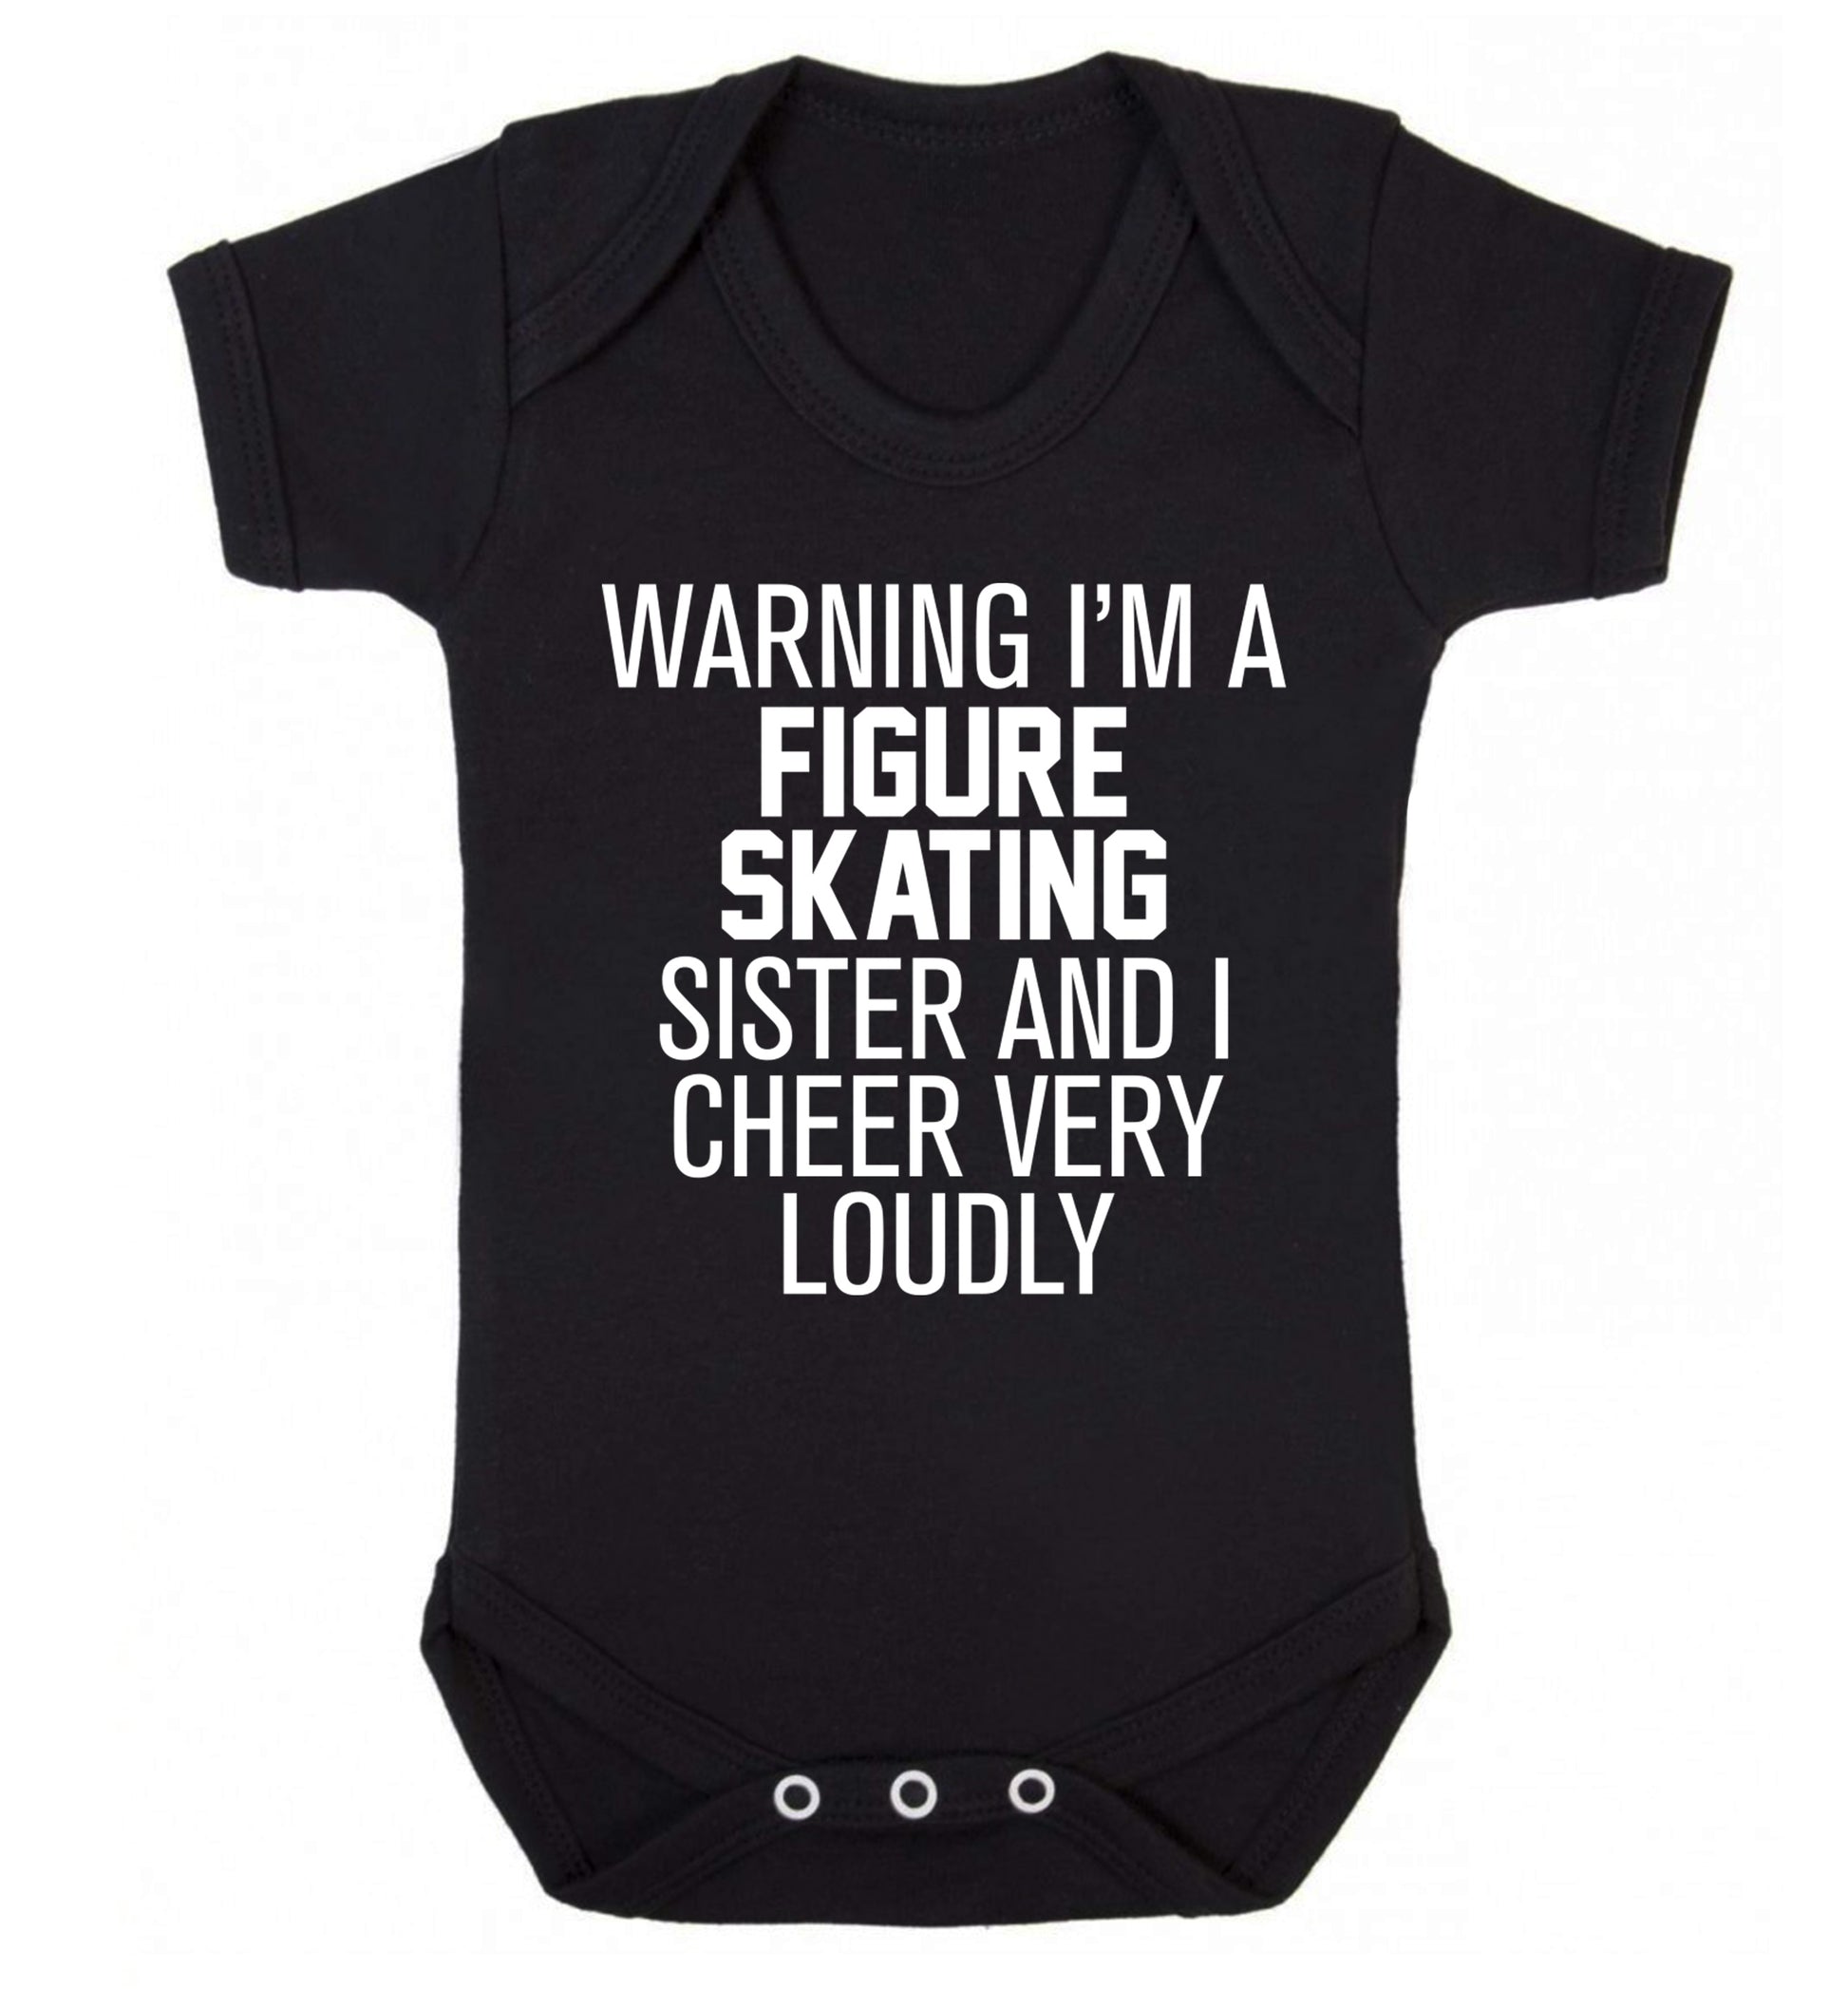 Warning I'm a figure skating sister and I cheer very loudly Baby Vest black 18-24 months